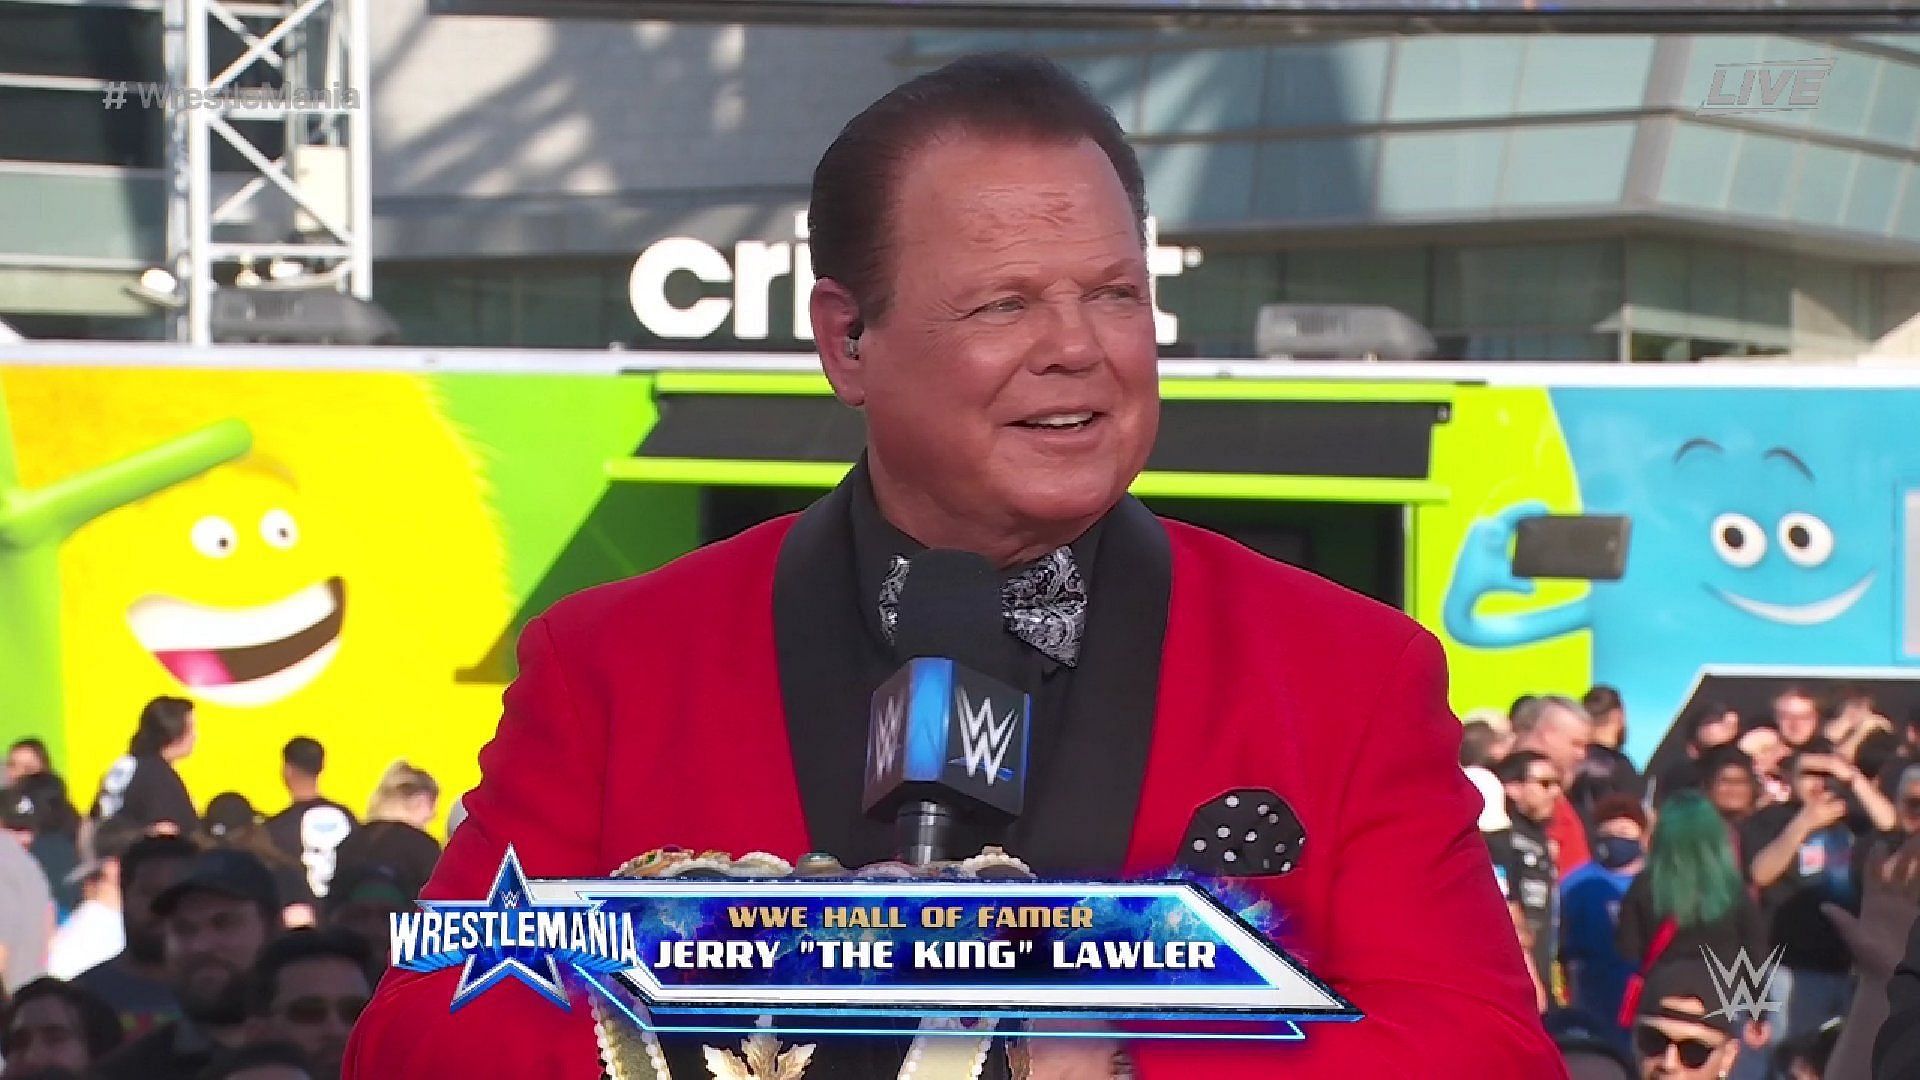 For over 5 decades, Jerry Lawler has been the king of pro wrestling.